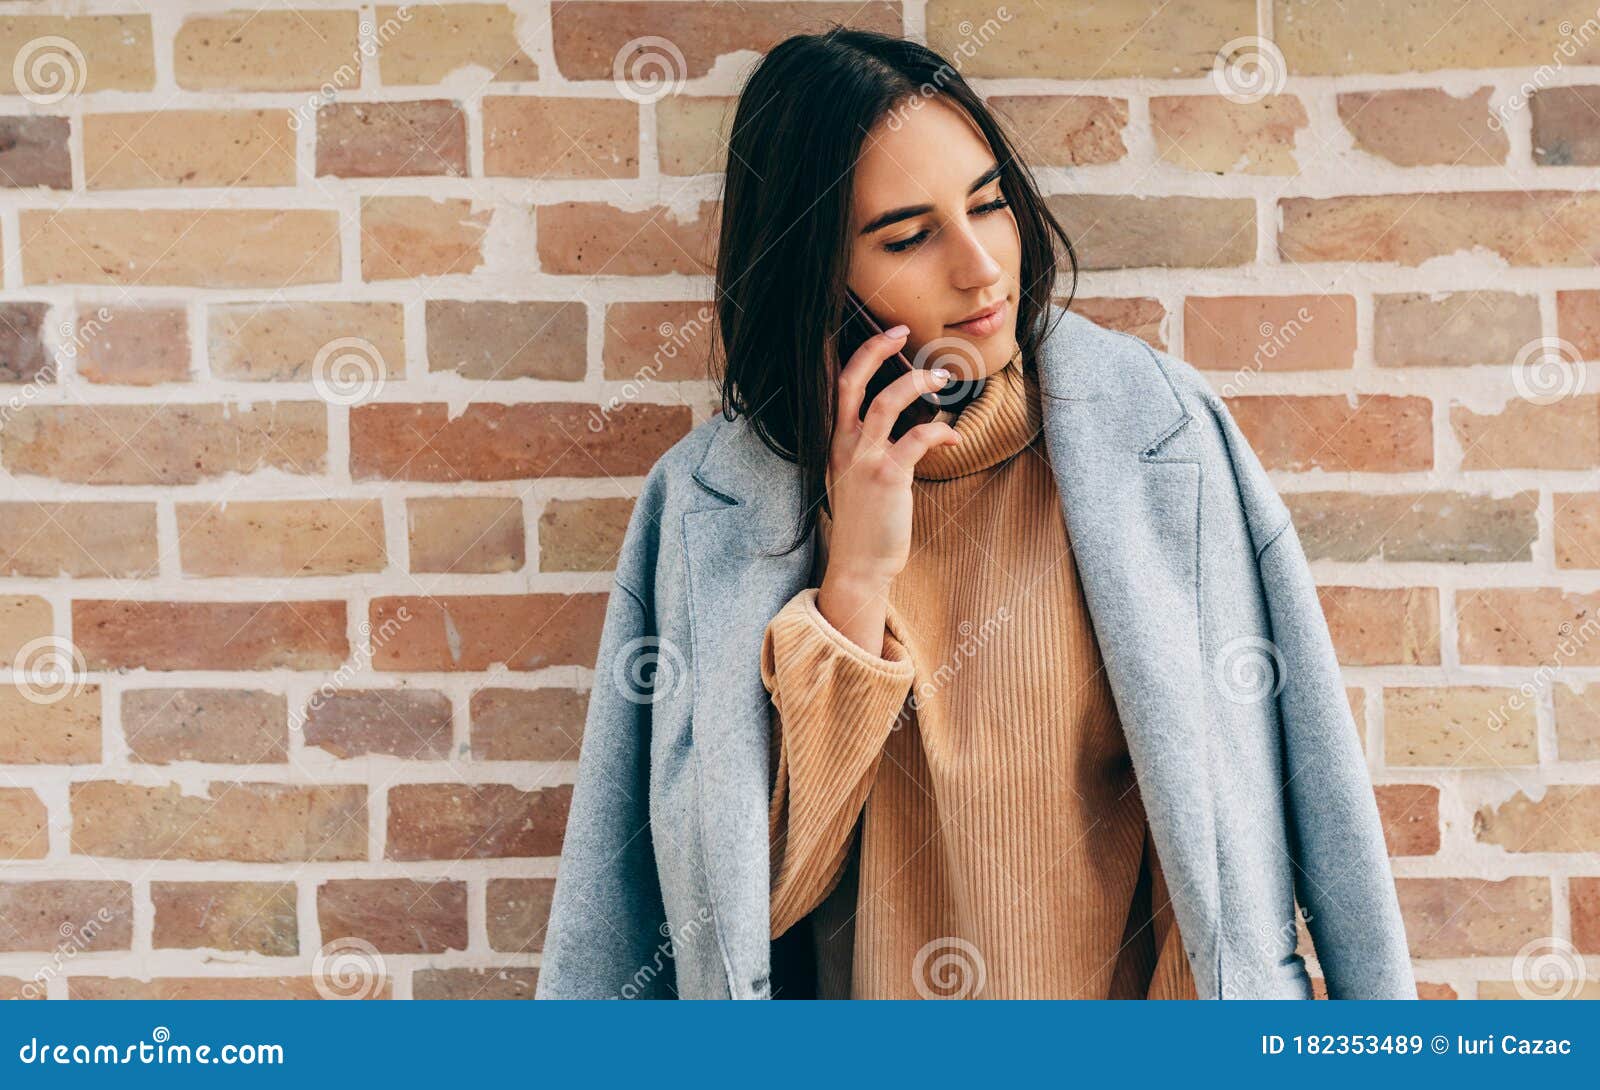 Woman against brick wall stock photo. Image of stood 